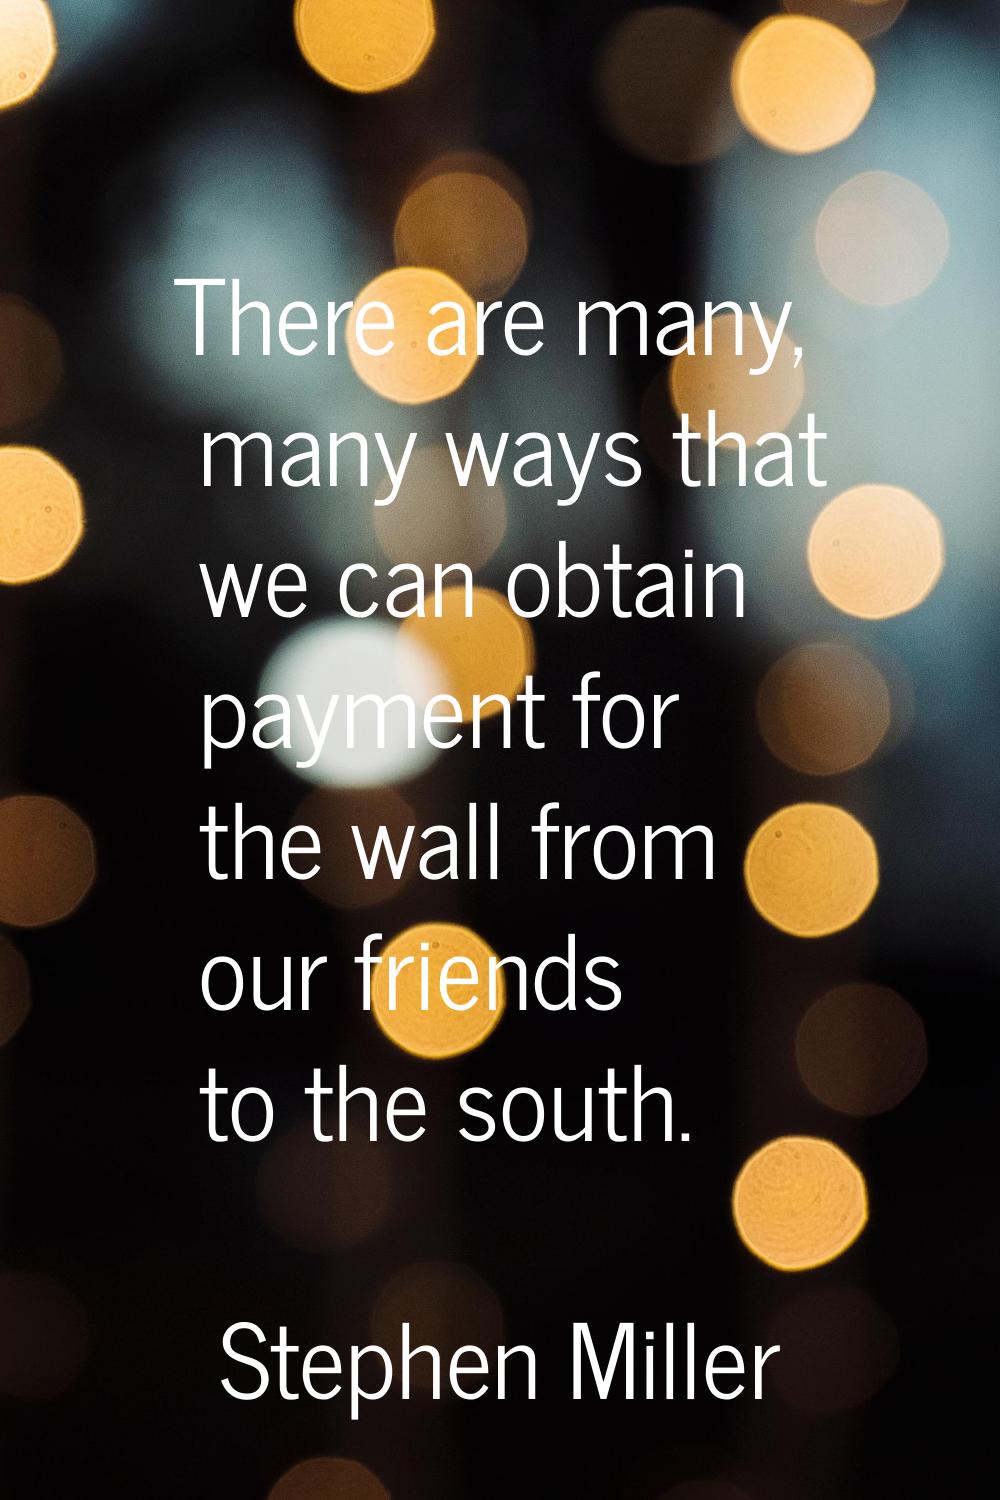 There are many, many ways that we can obtain payment for the wall from our friends to the south.